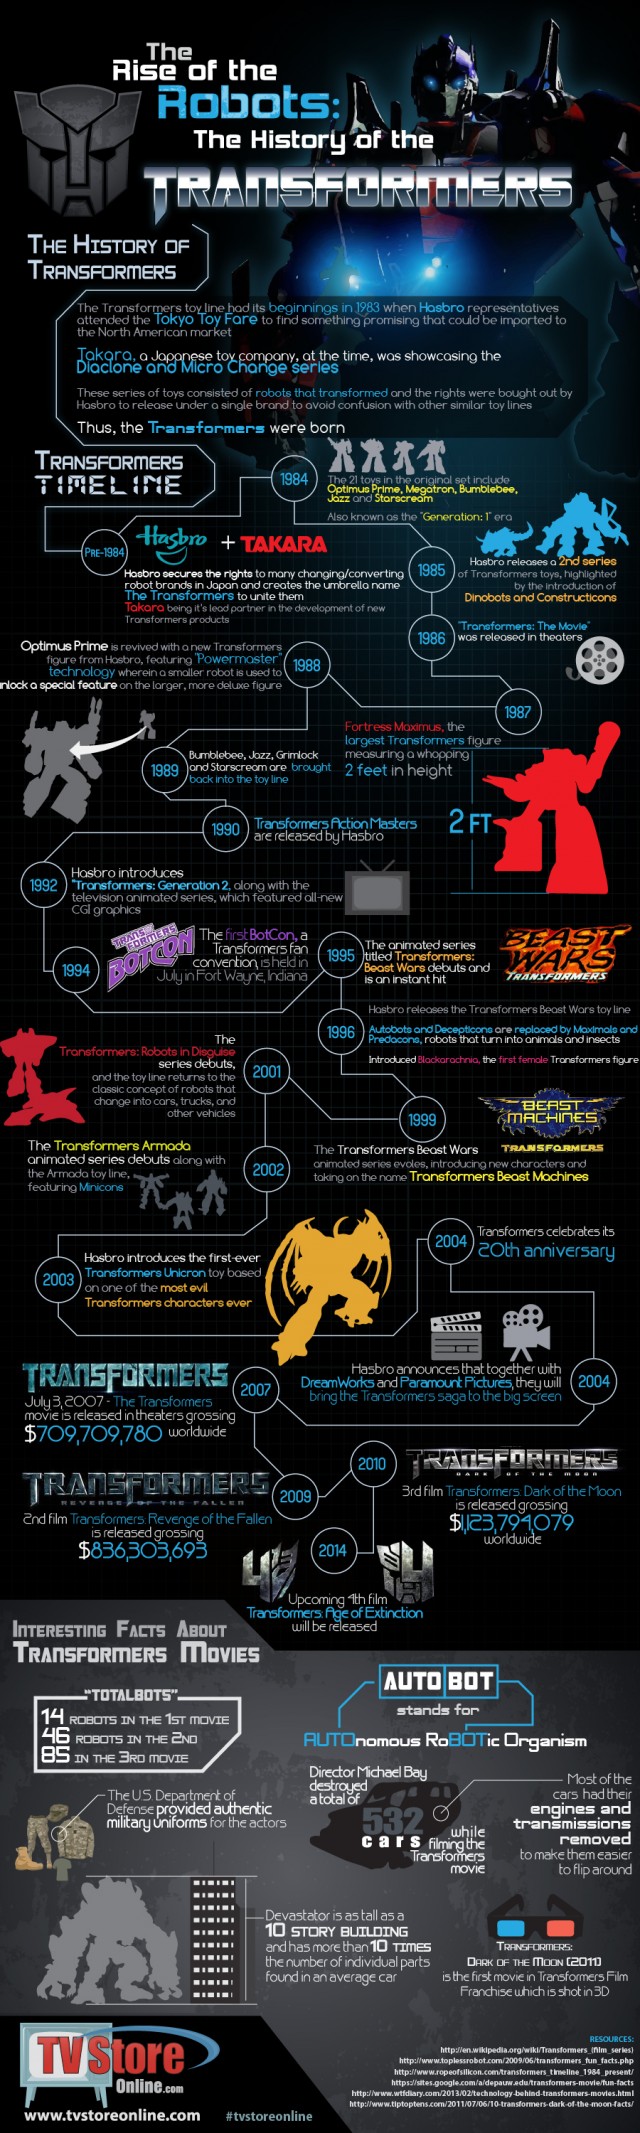 The History Of Tranformers | Daily Infographic